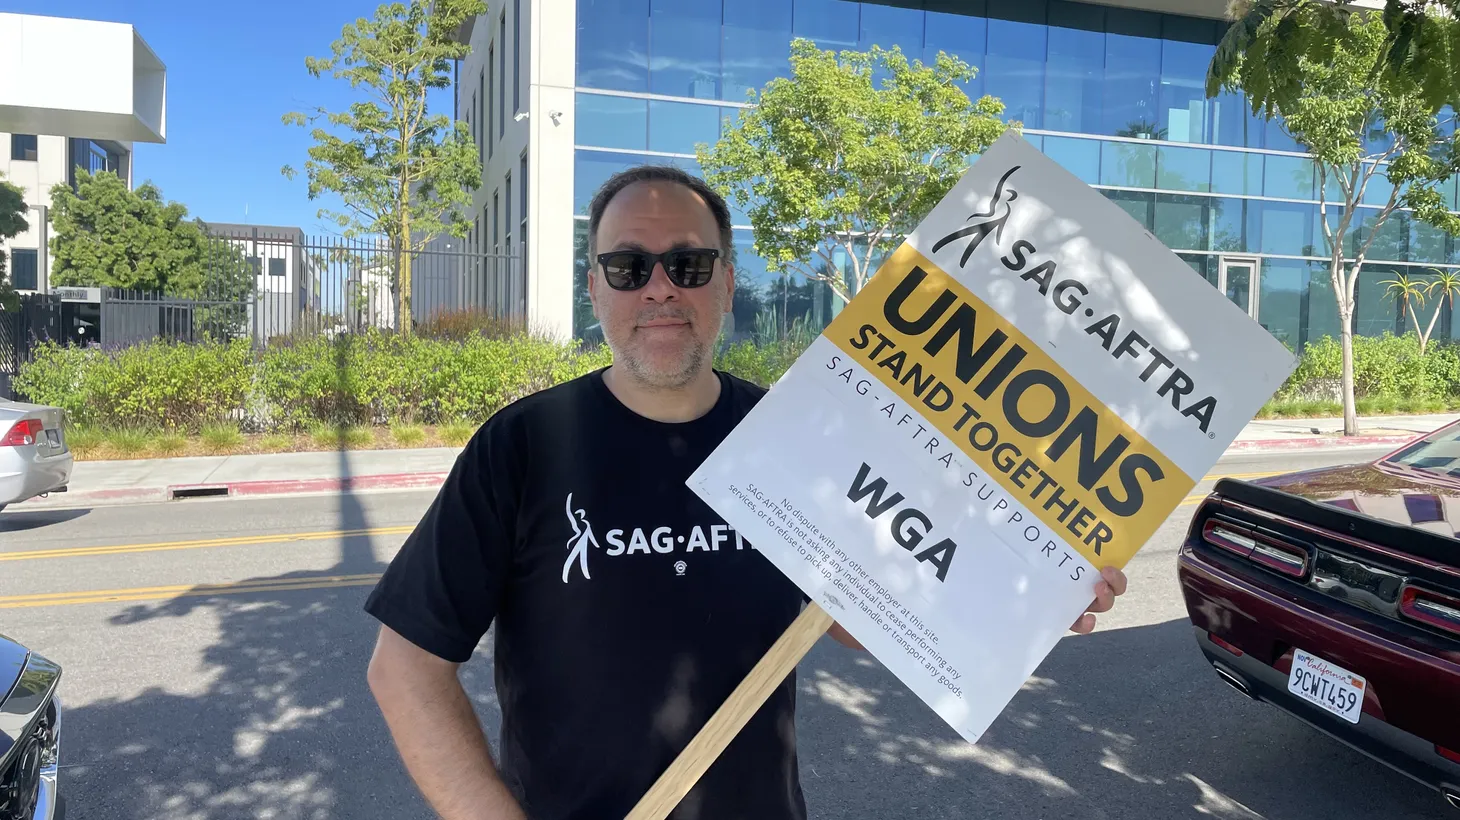 Chris Paseka attends WGA picket lines about twice a week in solidarity. He is a character actor and member of SAG-AFTRA.